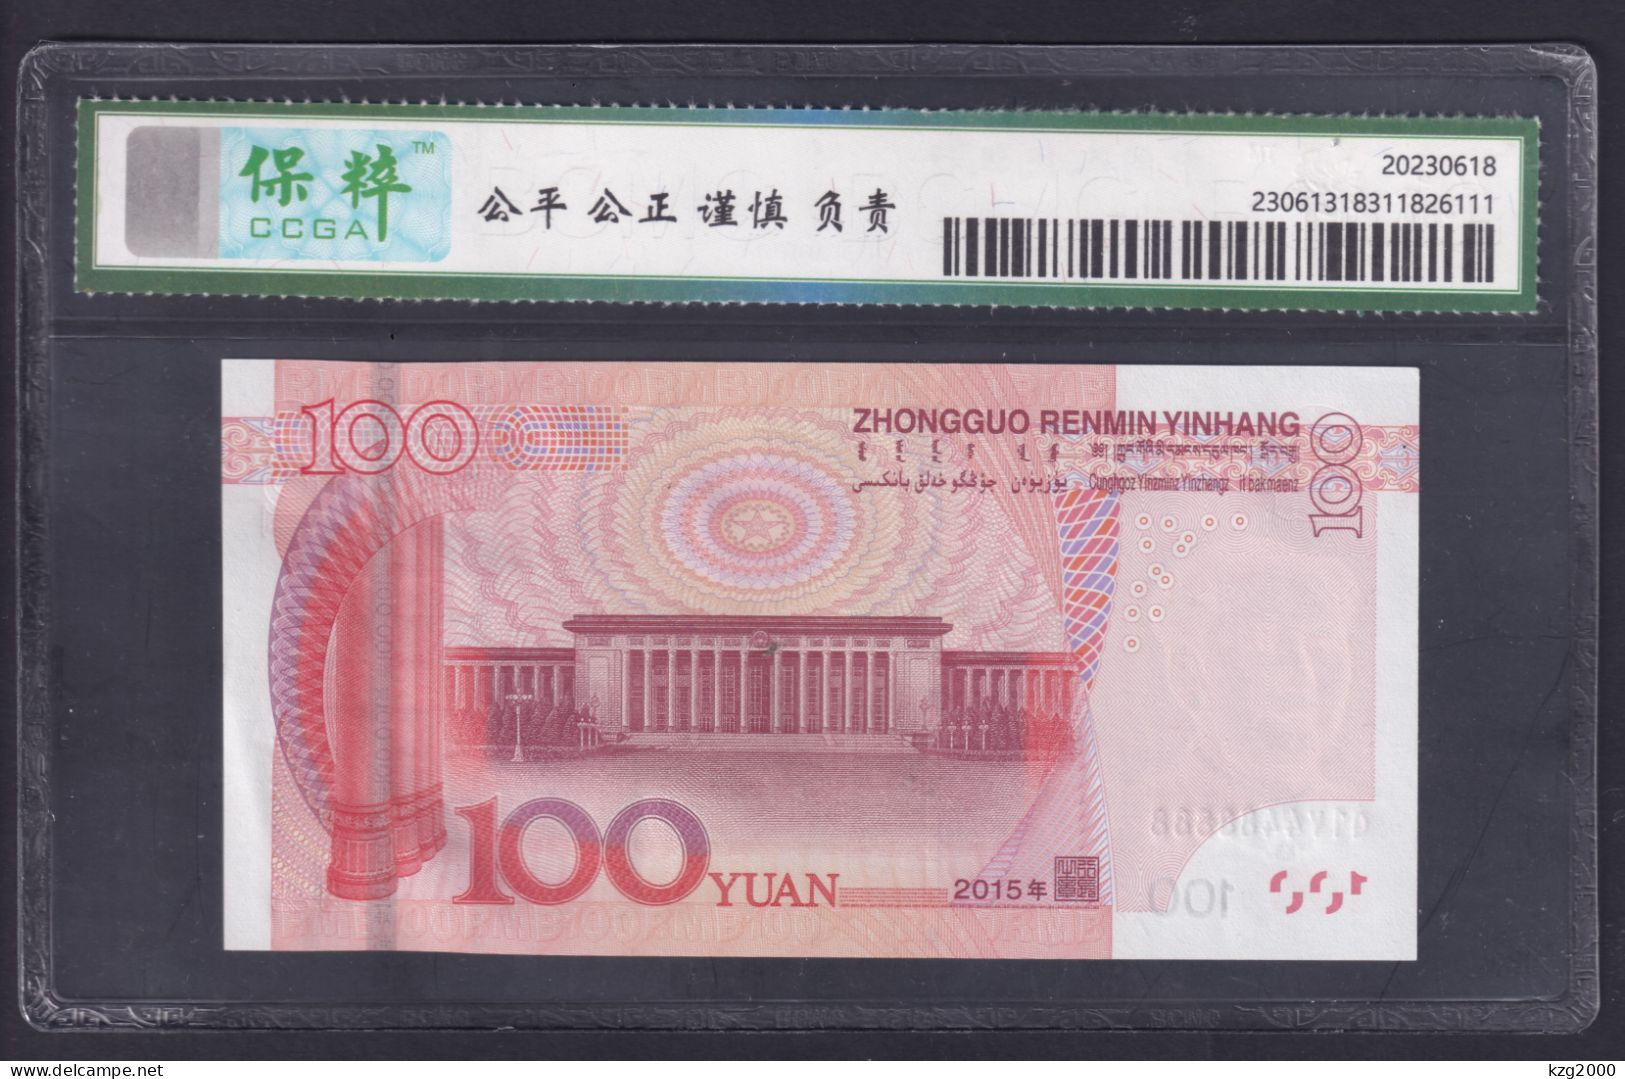 China 2005 Paper Money  Banknotes 5th Edition 100 Yuan S/N 88888 Lucky Number Portrait Of Chairman Mao Zedong Grade 69 - China